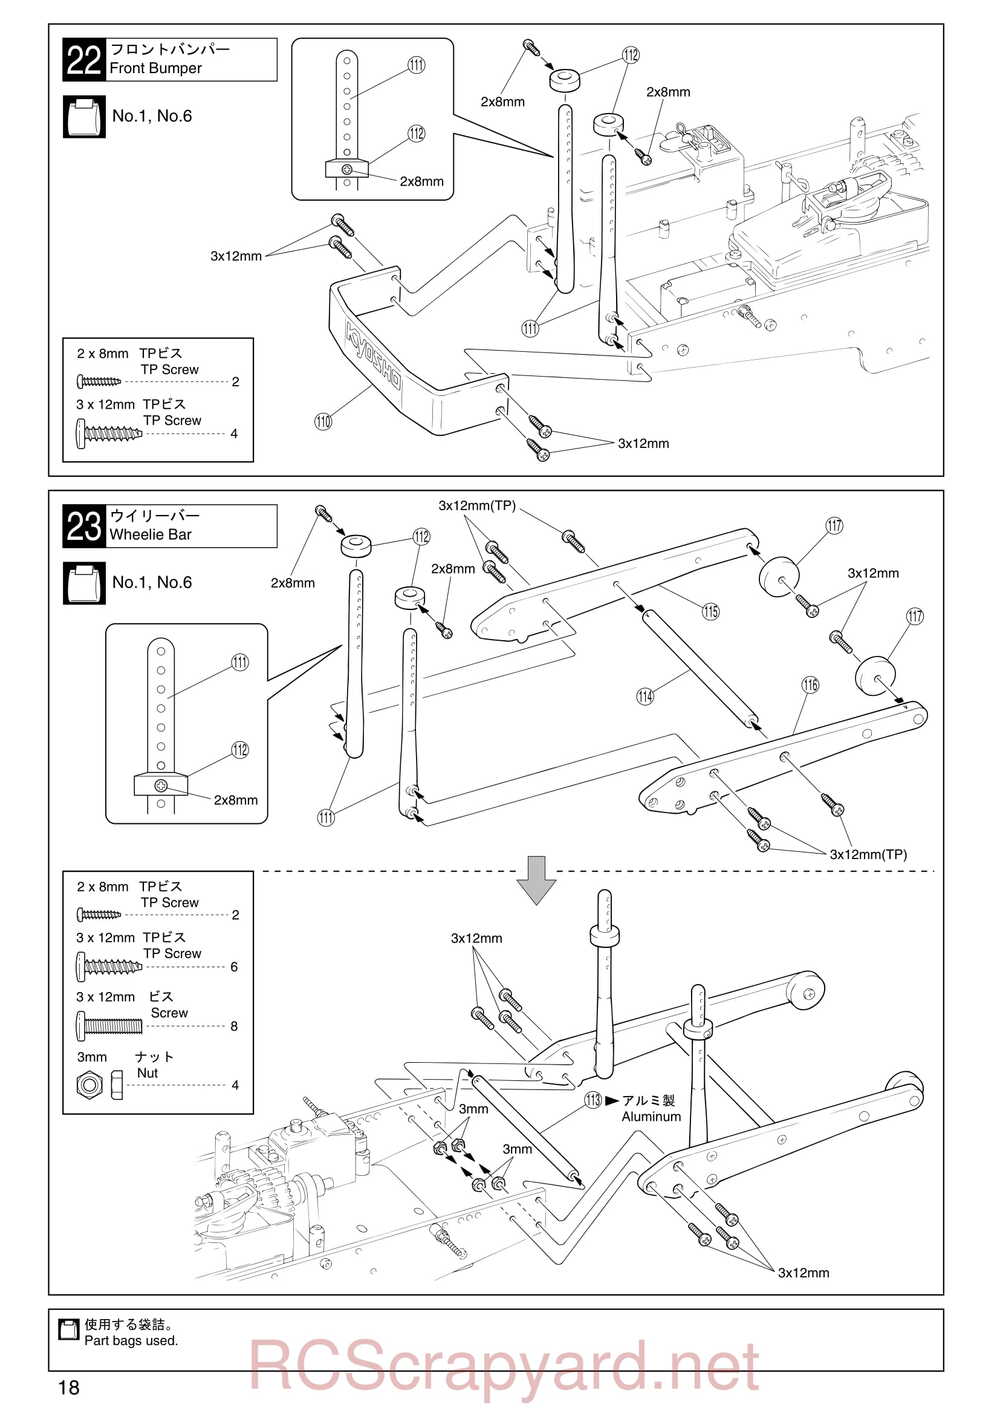 Kyosho - 31224 - Mad-Armour - Manual - Page 18